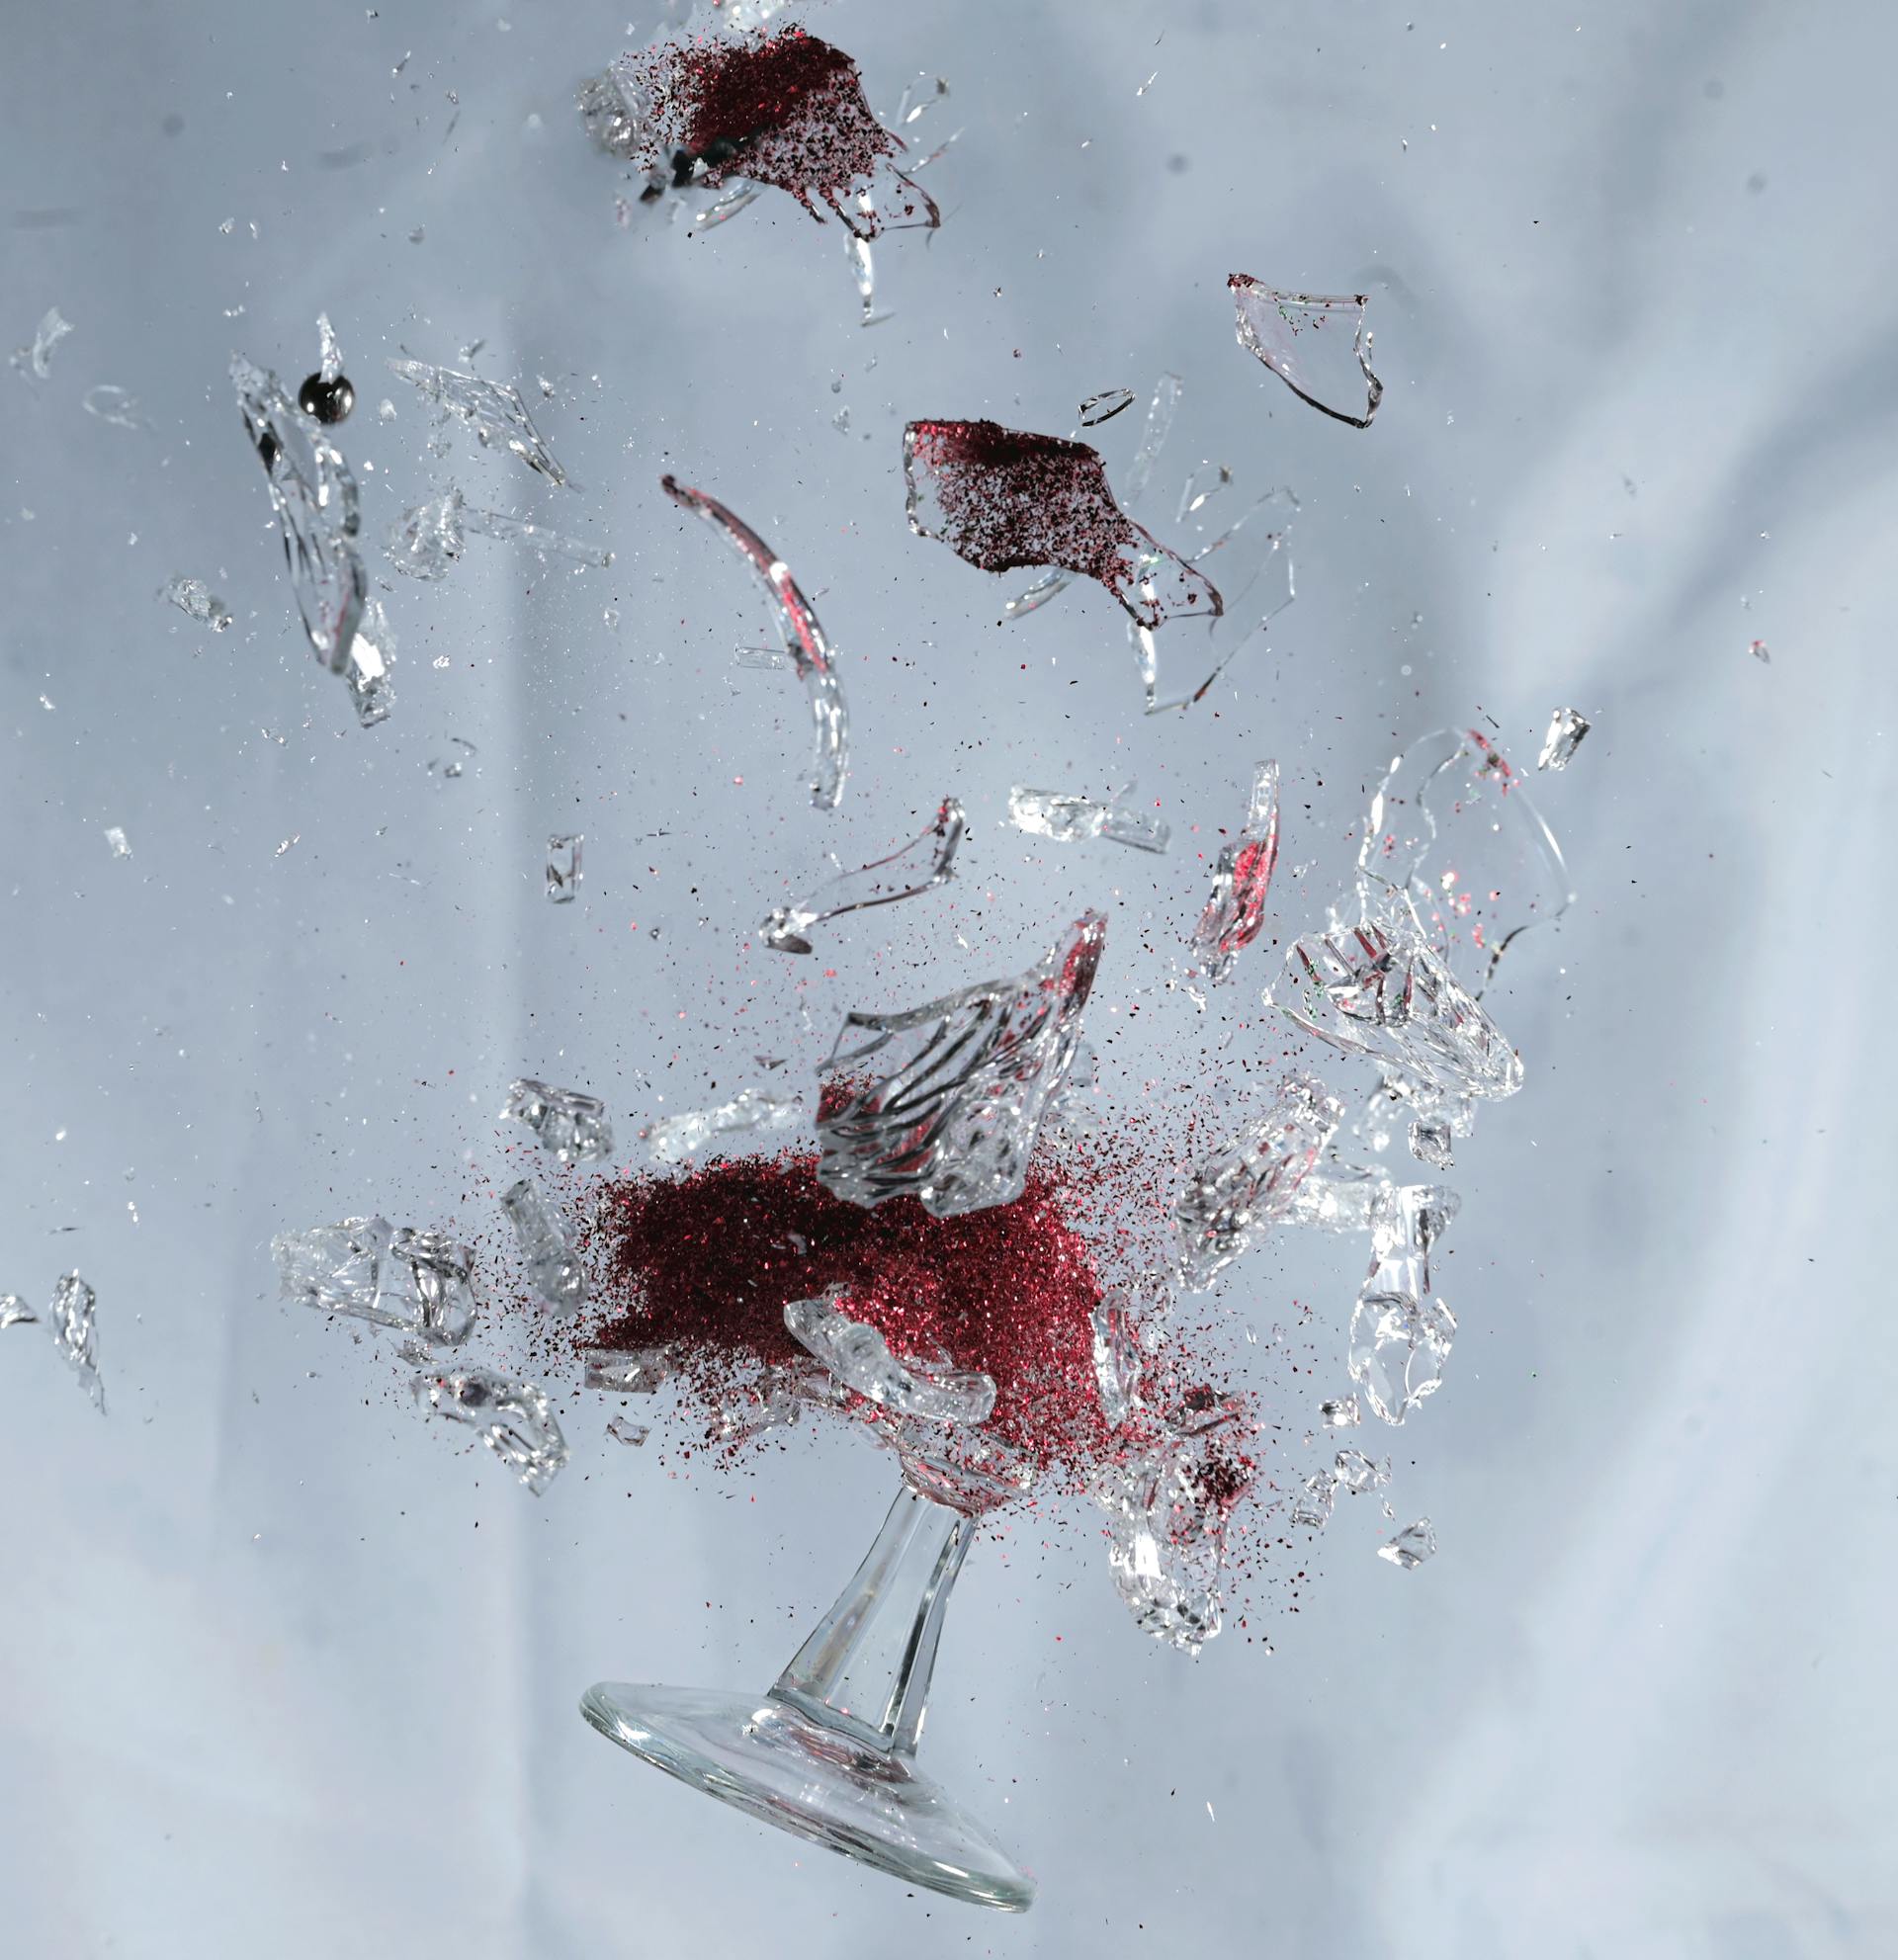 Shattered glass | Source: Pexels